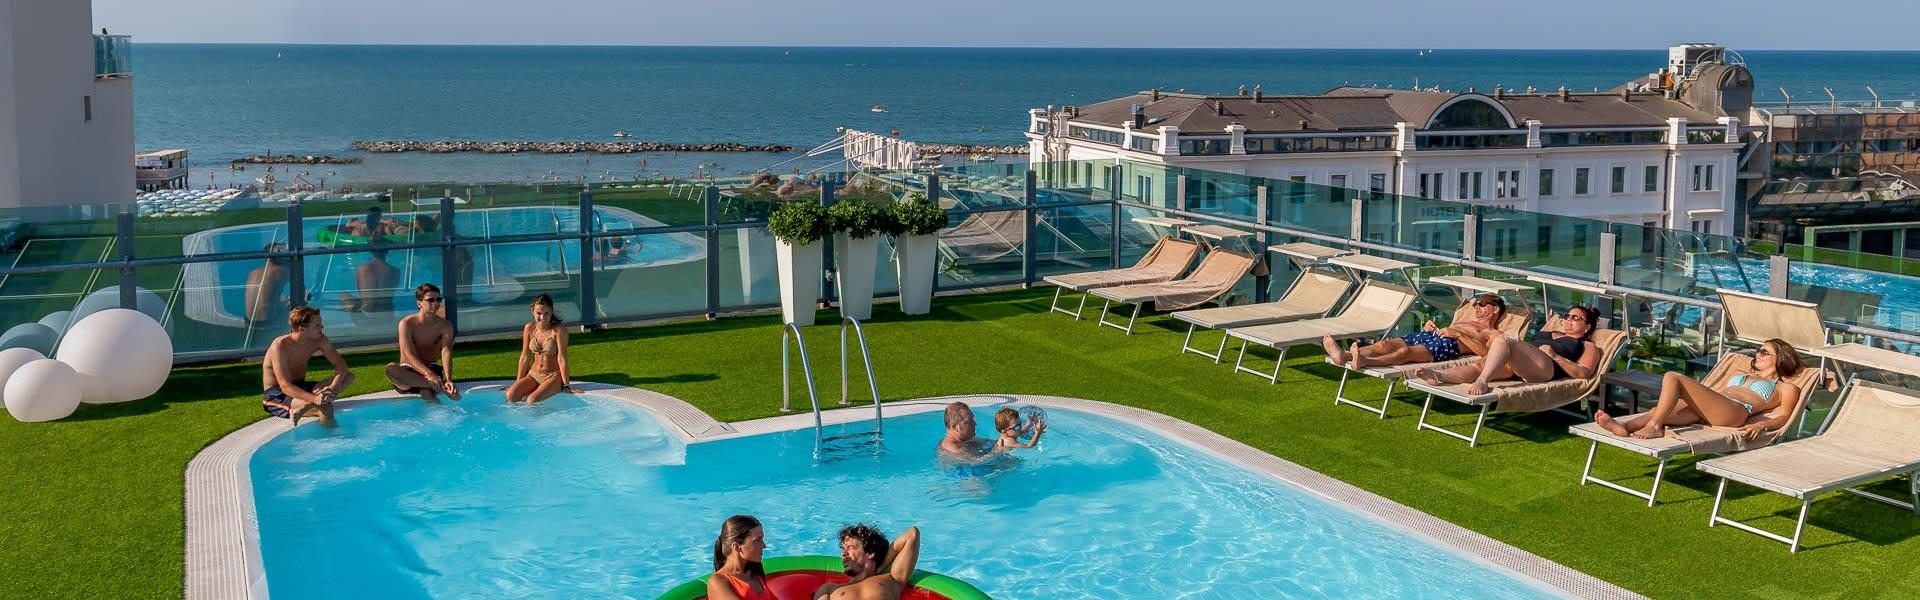 hotelsanmarcocattolica en special-offer-early-june-cattolica-hotel 003